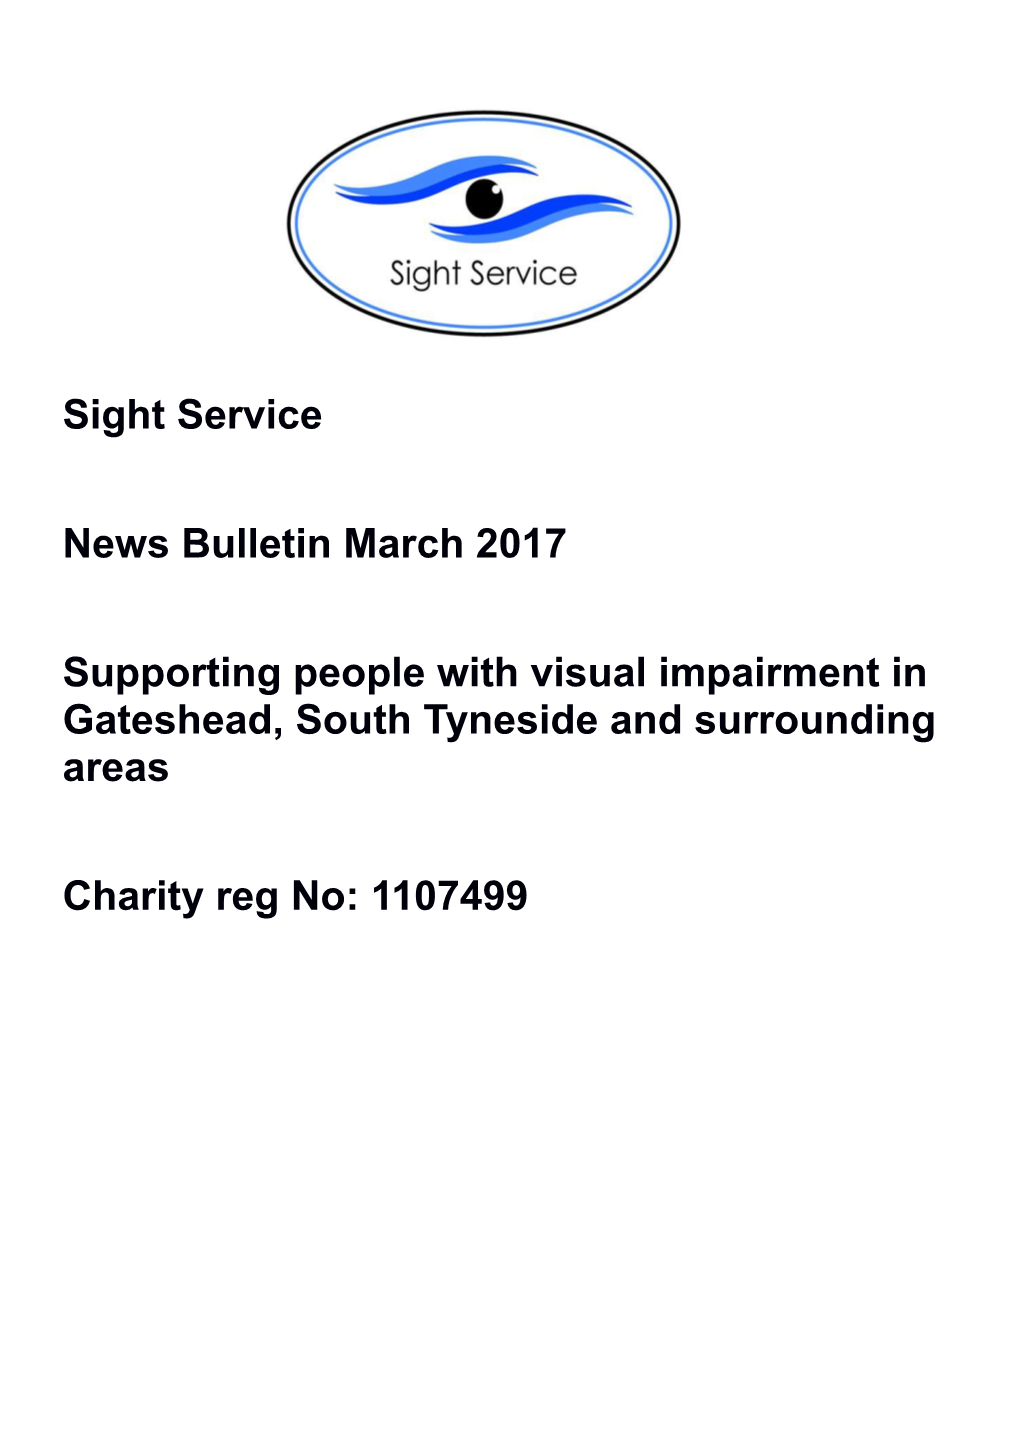 Supporting People with Visual Impairment in Gateshead, South Tyneside and Surrounding Areas